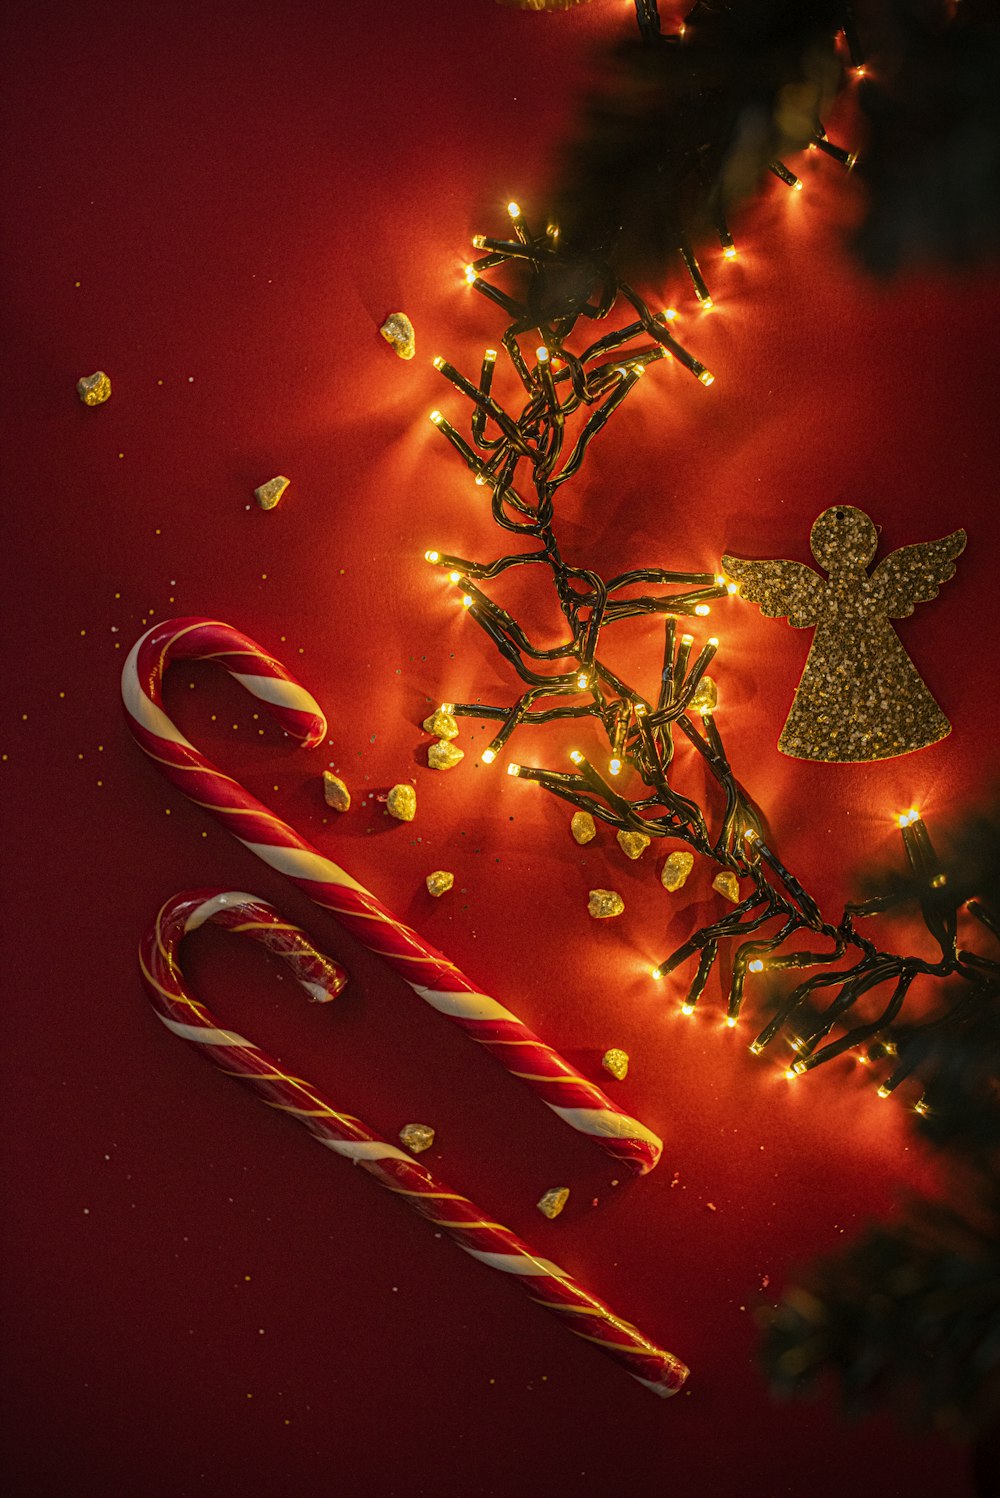 Christmas Red Pictures | Download Free Images on Unsplash